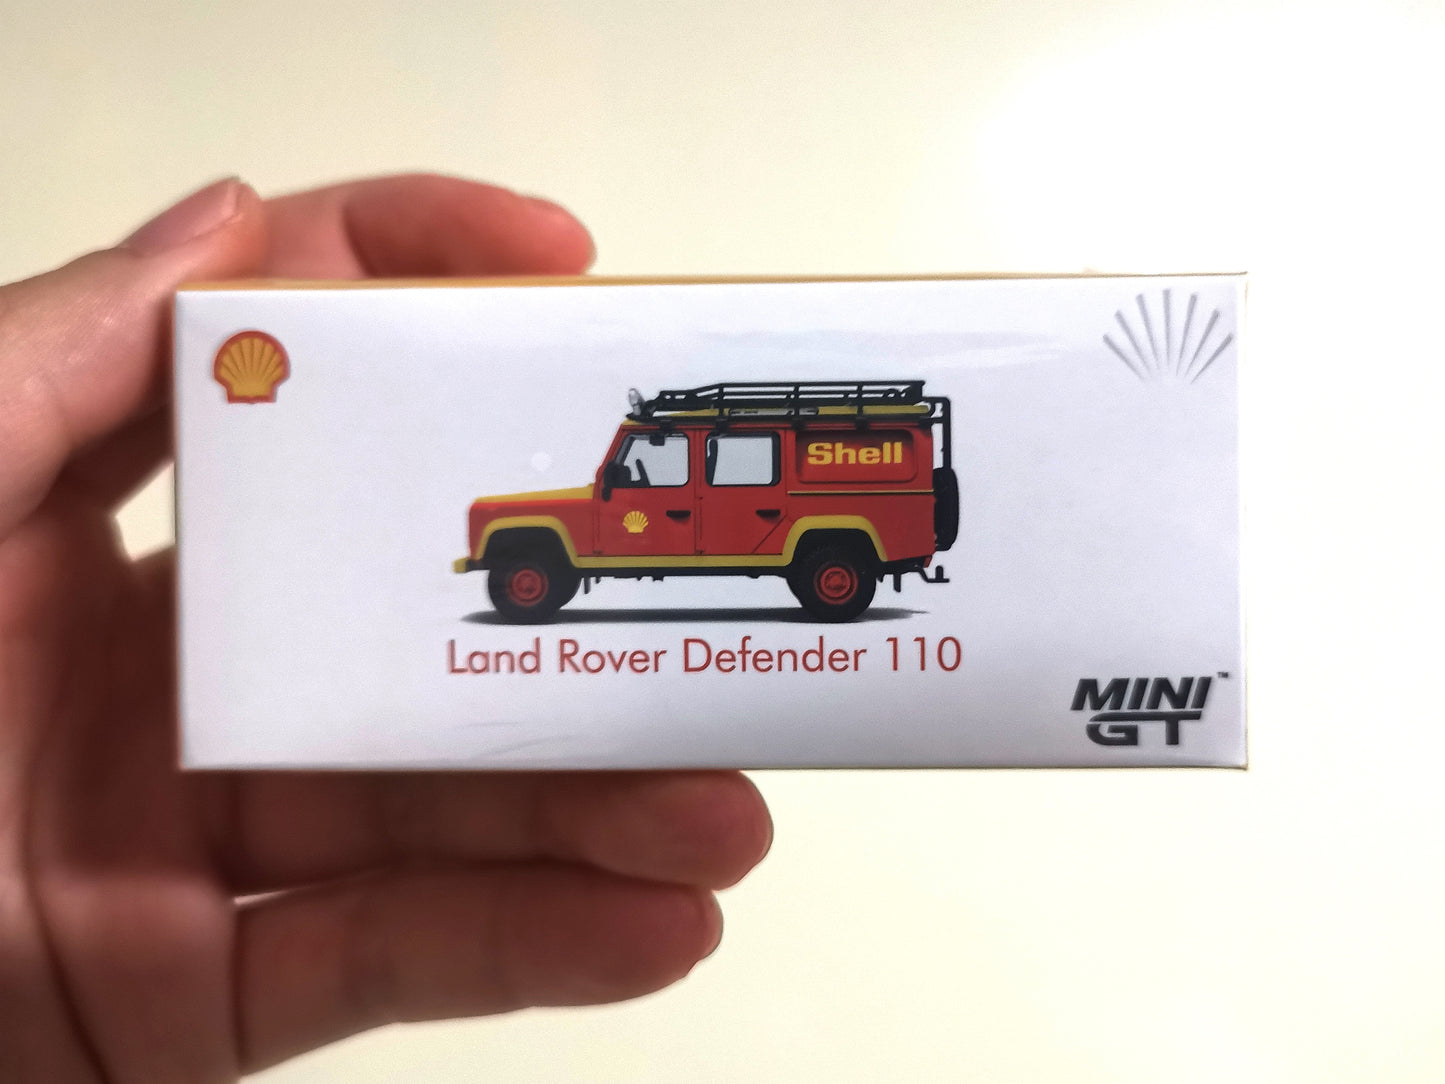 MiniGT x shell Exclusive #264 Land Rover Defender 110 Shell Mini GT